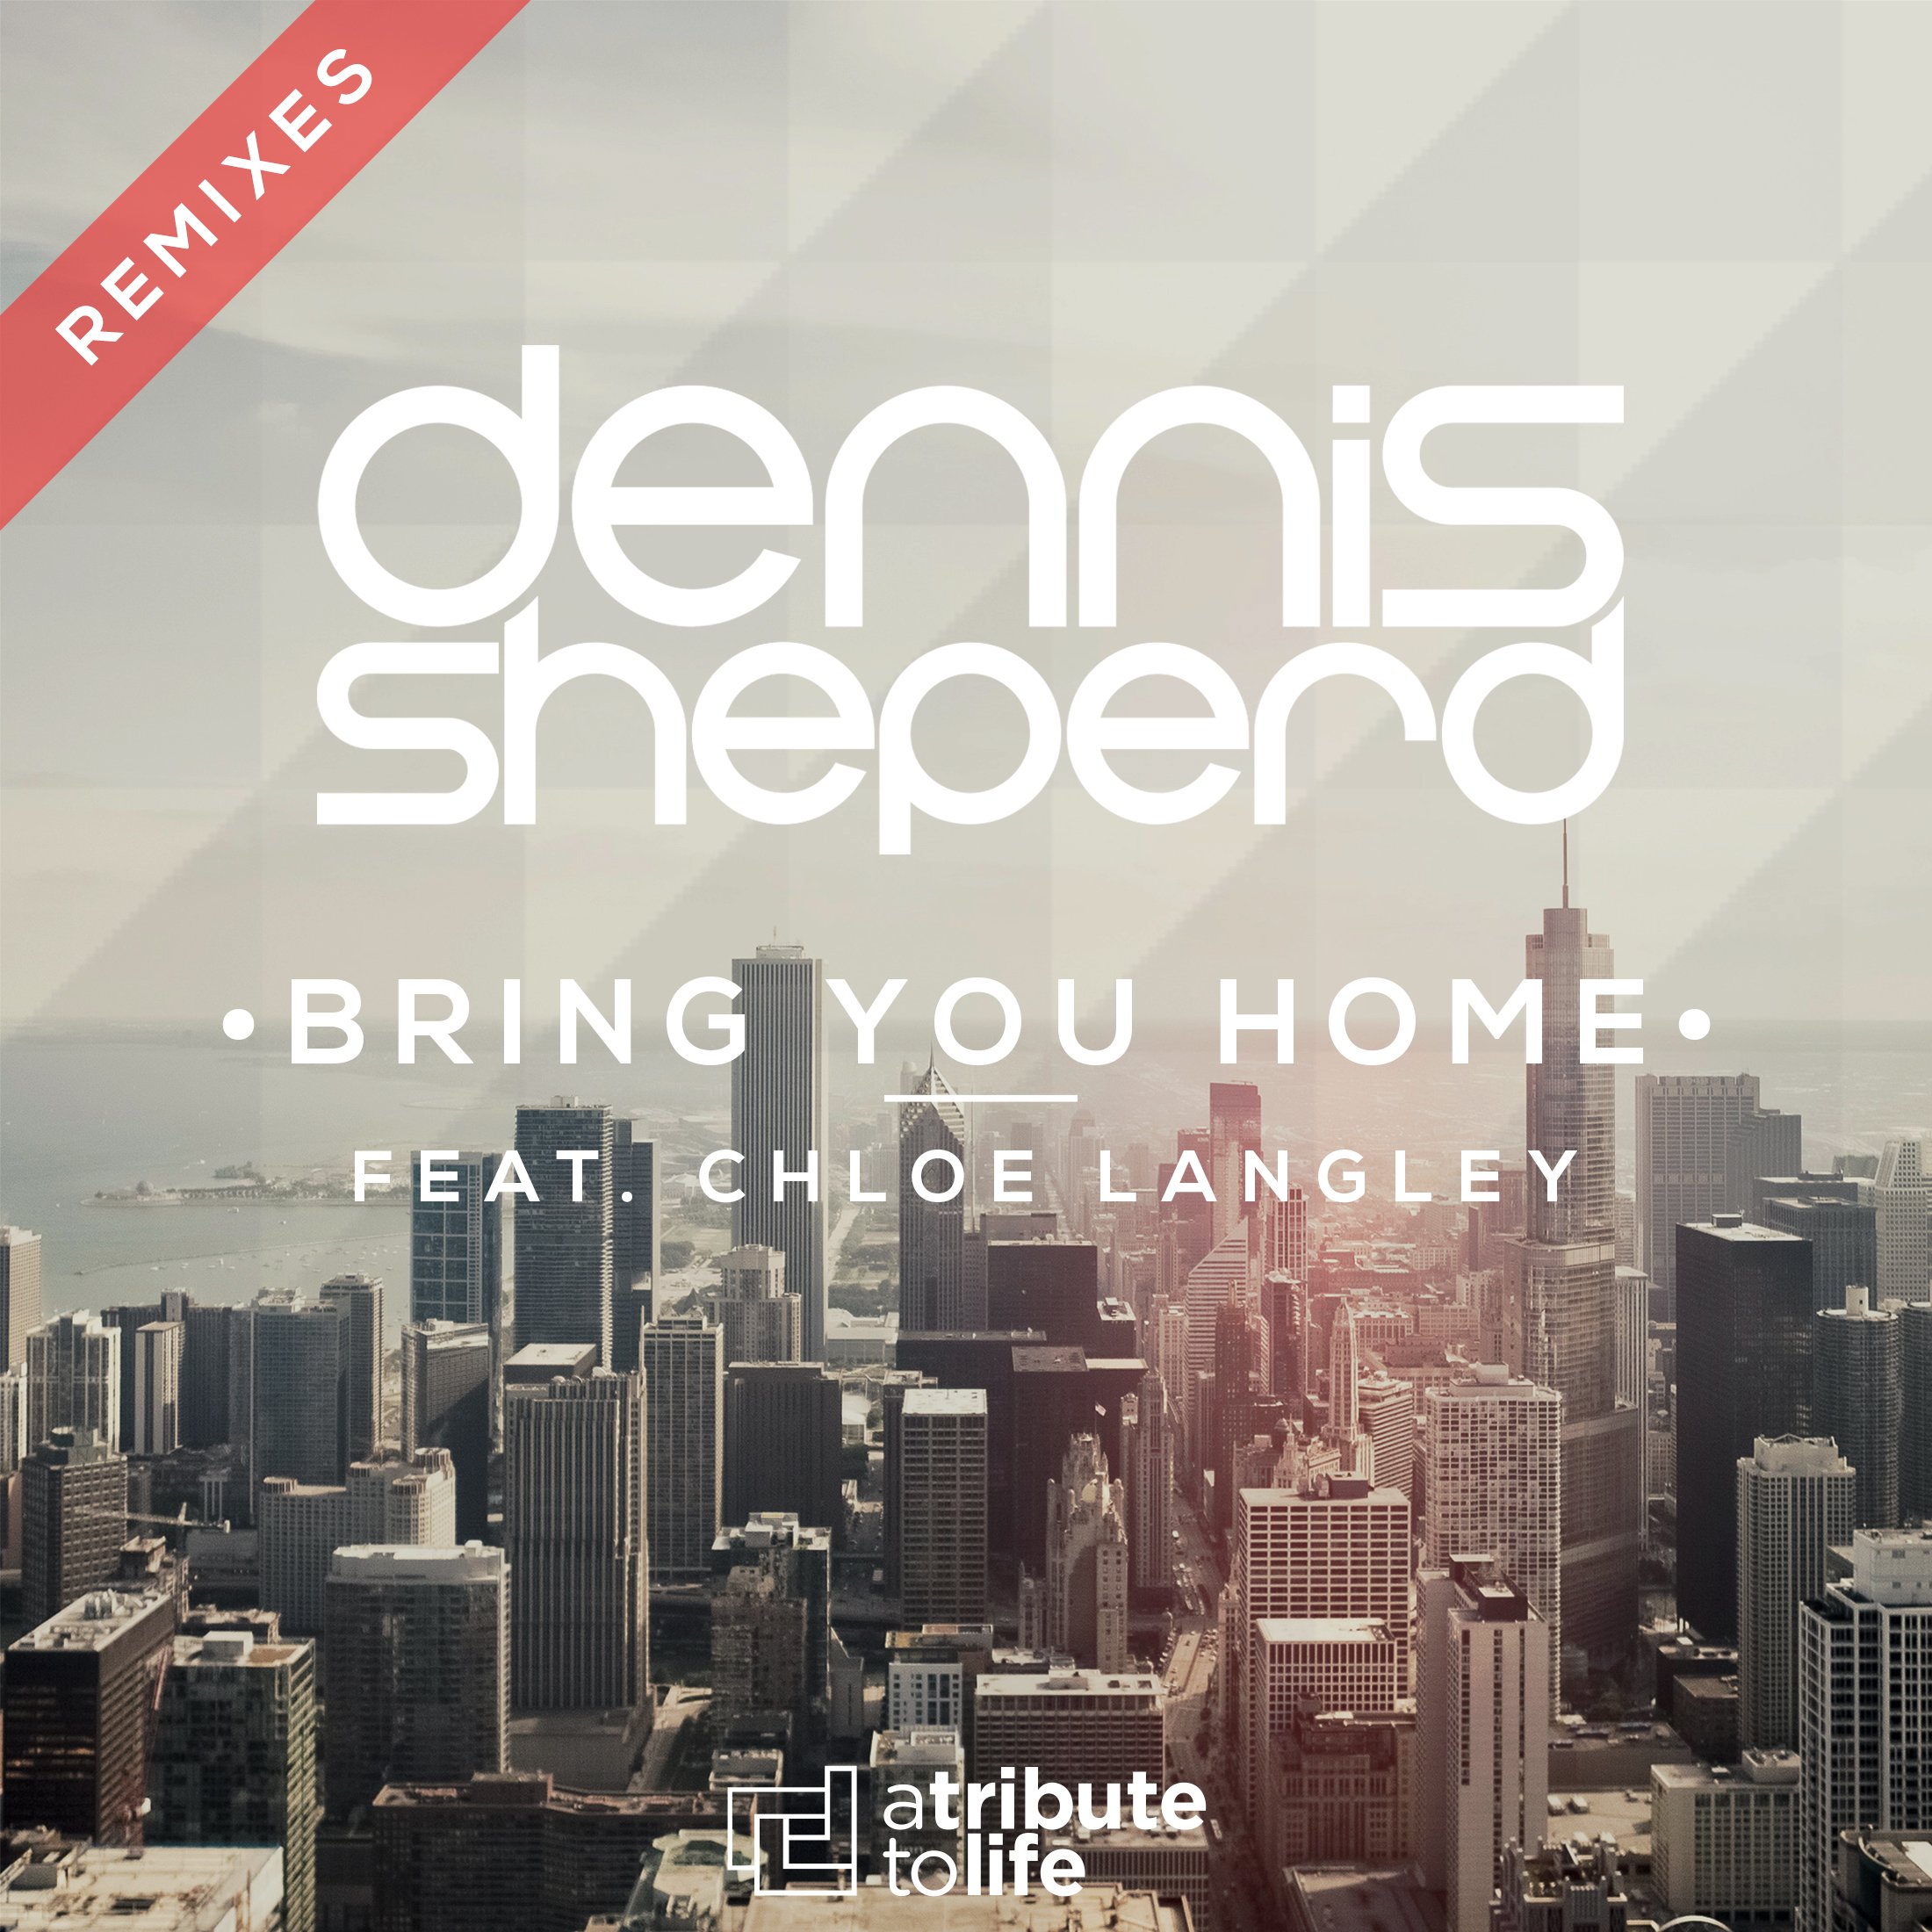 When you home last night. Chloe Langley. Dennis Sheperd. Bring you Home. Brings you.